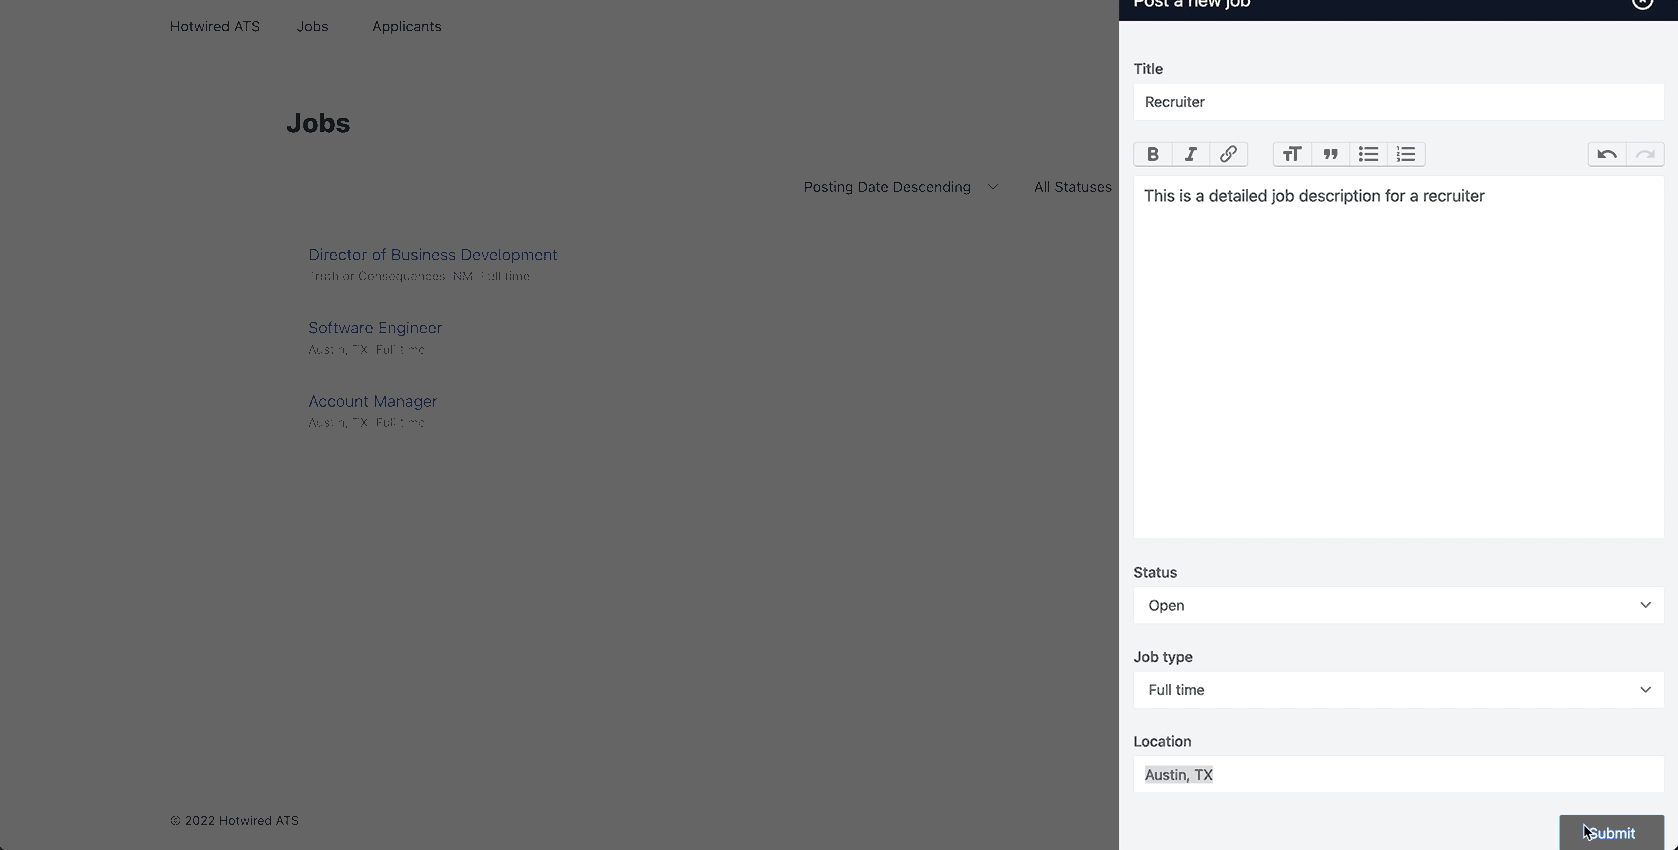 A gif of a user filling out a job posting form in a slideover drawer. When they click the submit button on the form, the slideover slides off the right edge of the screen and the new job is added to the list of job postings already present on the page.